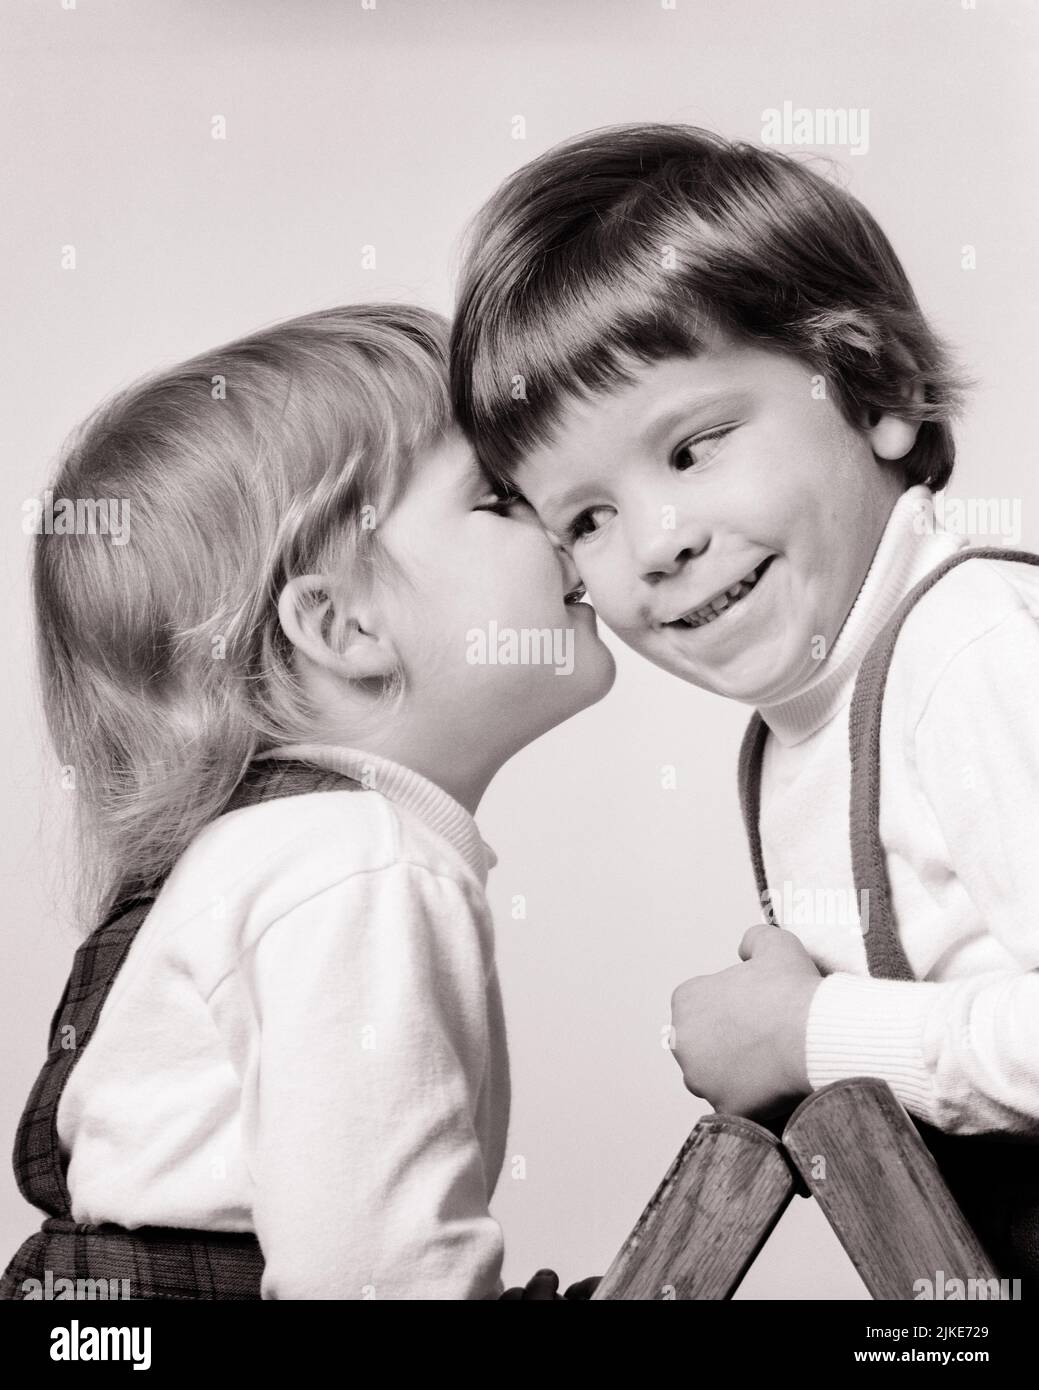 1960s TWO YOUNG GIRLS LITTLE SISTER EITHER WHISPERING IN OLDER ONE ON THE EAR OR KISSING HER ON CHEEK - j13192 HAR001 HARS SIBLINGS SISTERS B&W CHEERFUL SIBLING SMILES JOYFUL OR PERSONAL ATTACHMENT AFFECTION EMOTION JUVENILES PECK SMOOCH BABY GIRL BLACK AND WHITE CAUCASIAN ETHNICITY HAR001 OLD FASHIONED Stock Photo